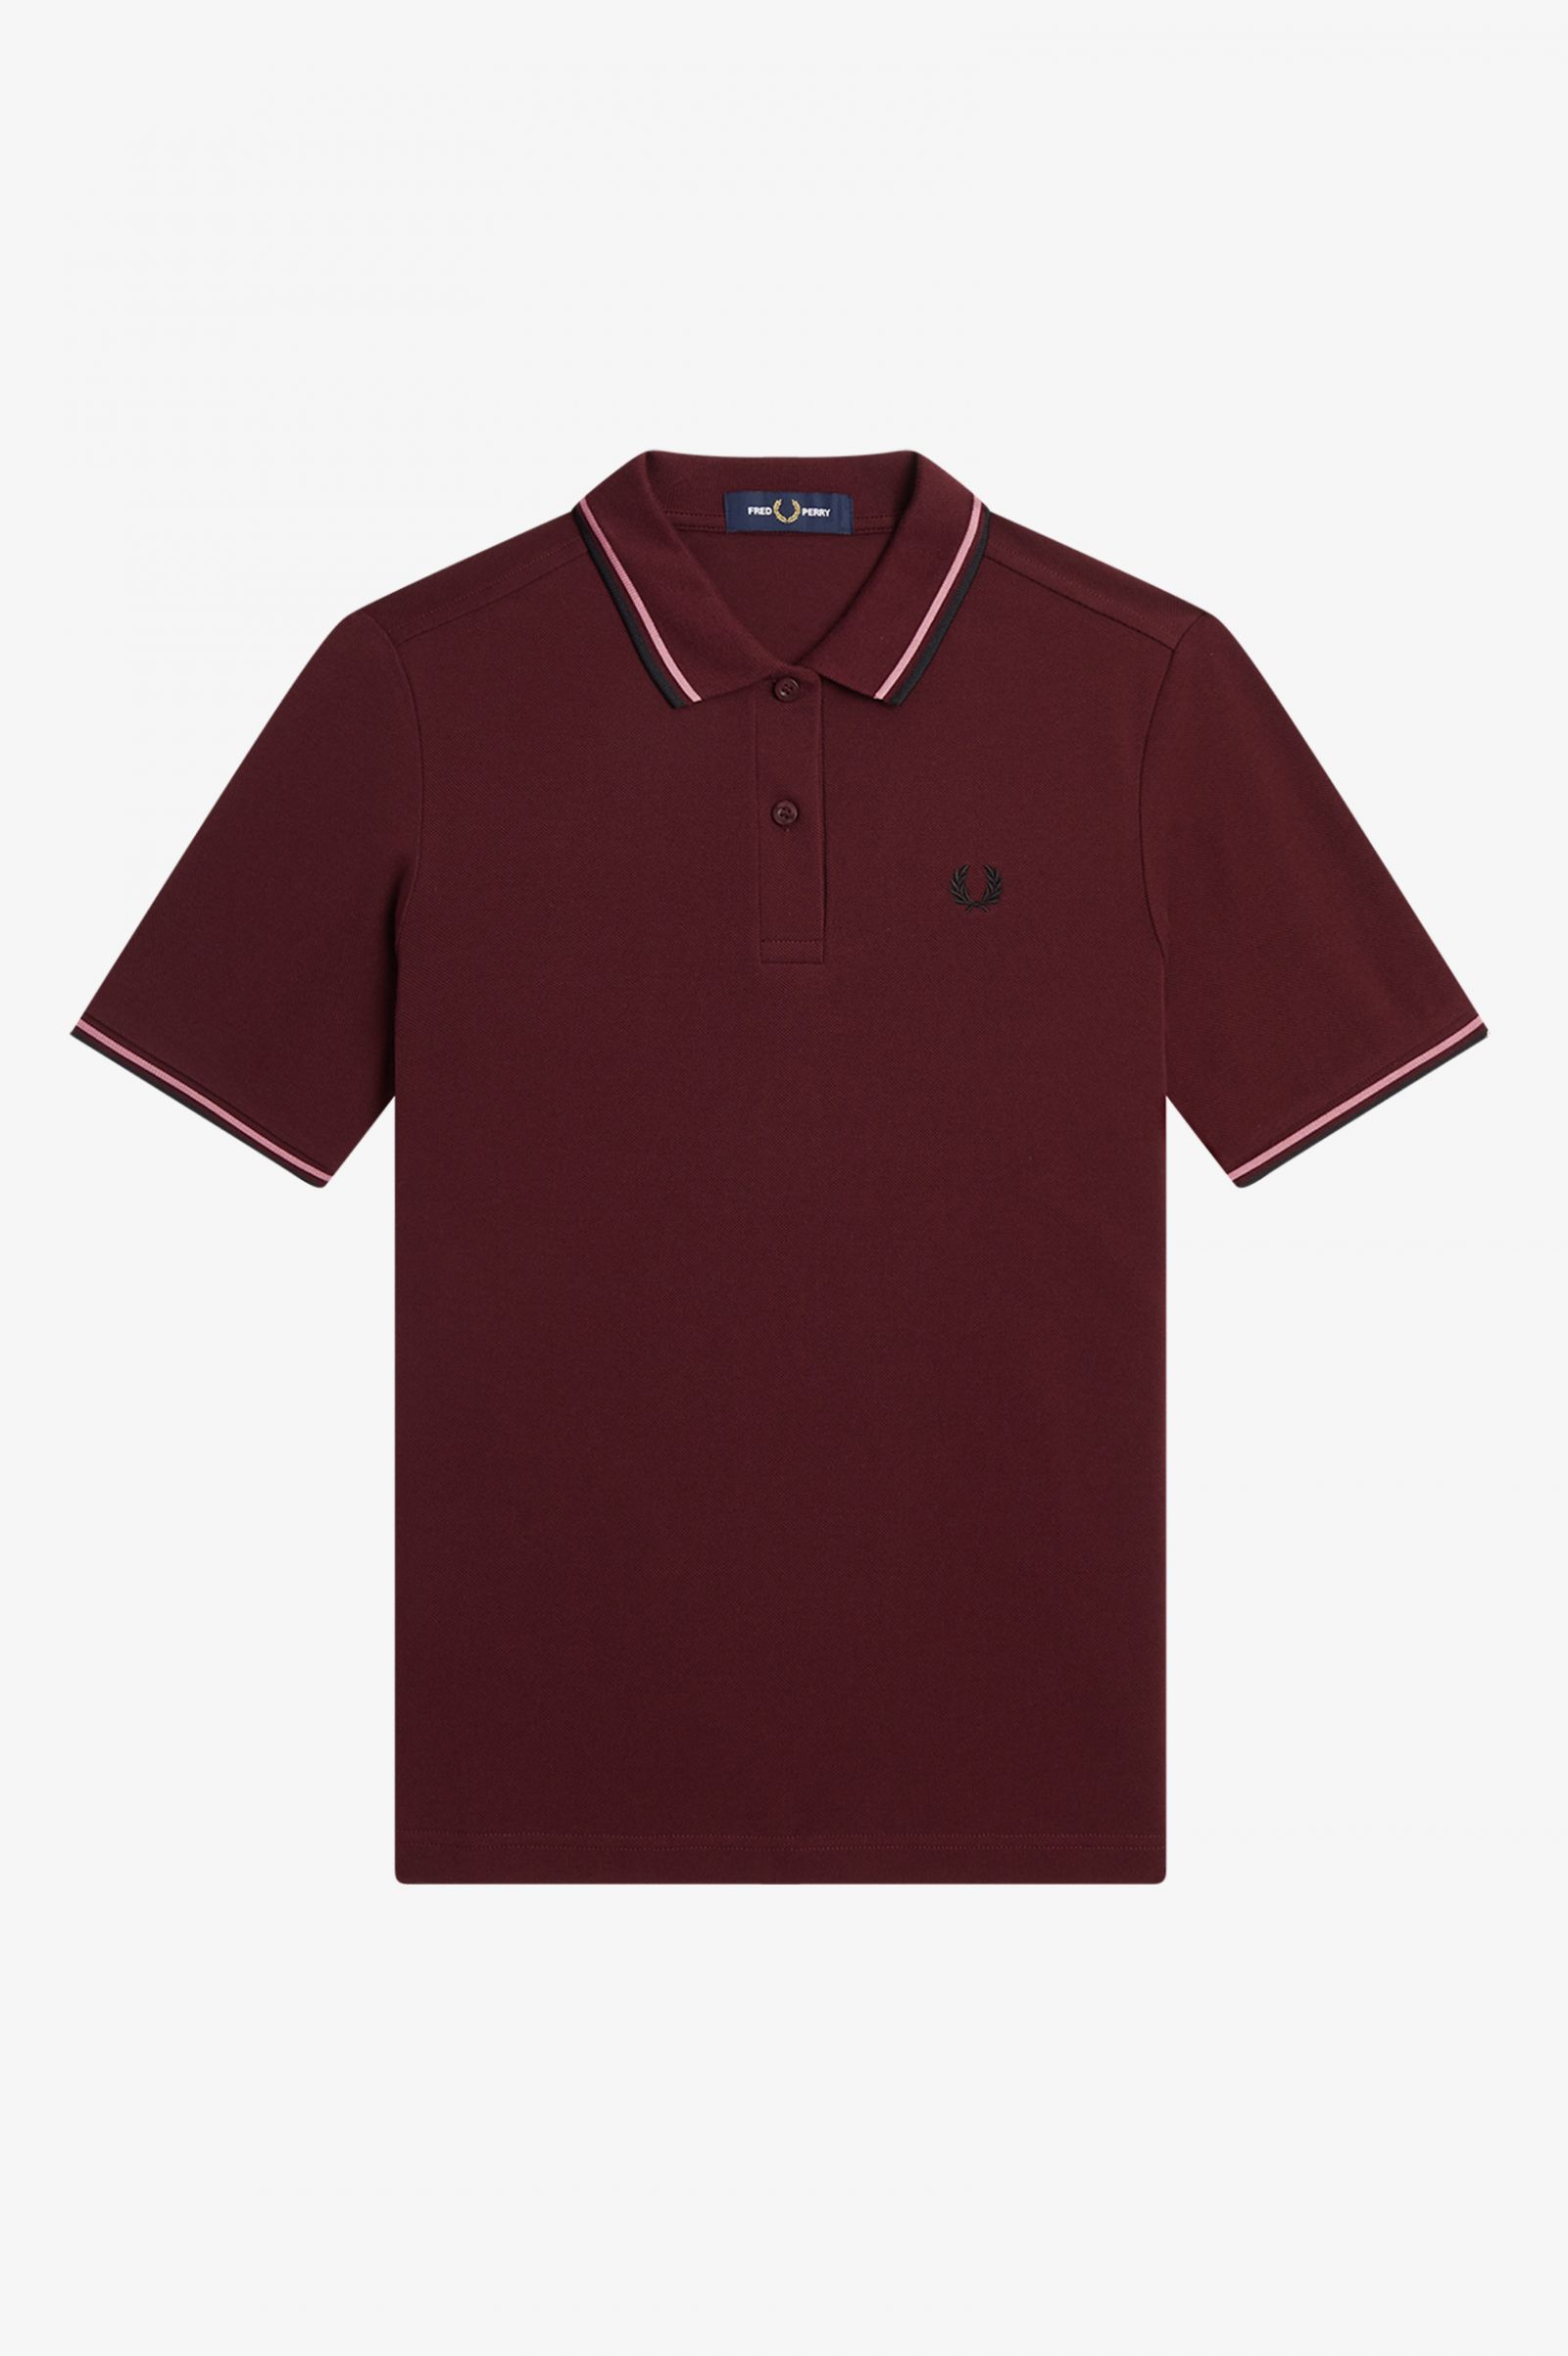 Fred Perry G3600 Twin Tipped Shirt in Oxblood/ Black/ Dusty Rose Pink